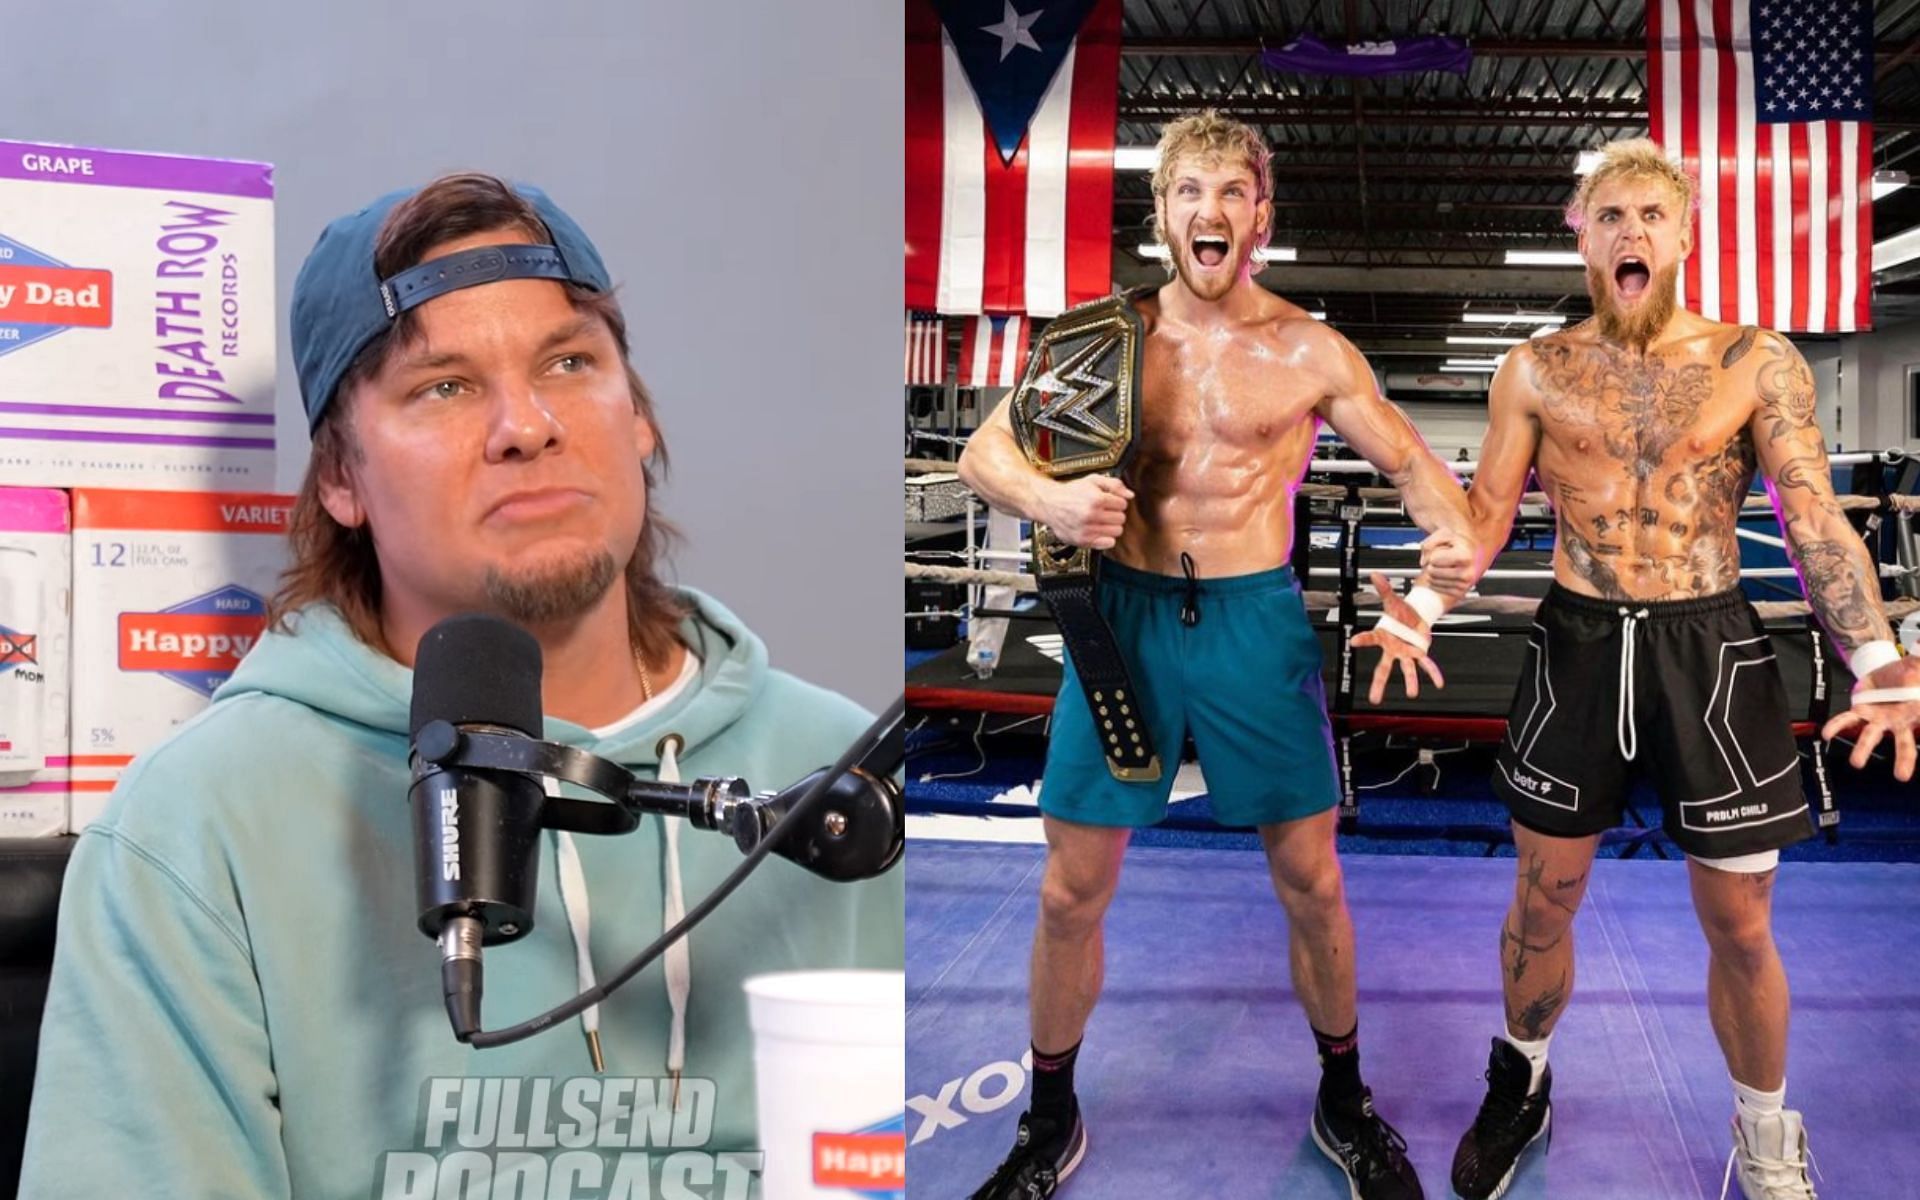 Theo Von on the FULL SEND PODCAST (left) and Logan and Jake Paul (right) [Images Courtesy: @FULLSENDPODCAST on YouTube and @GettyImages]